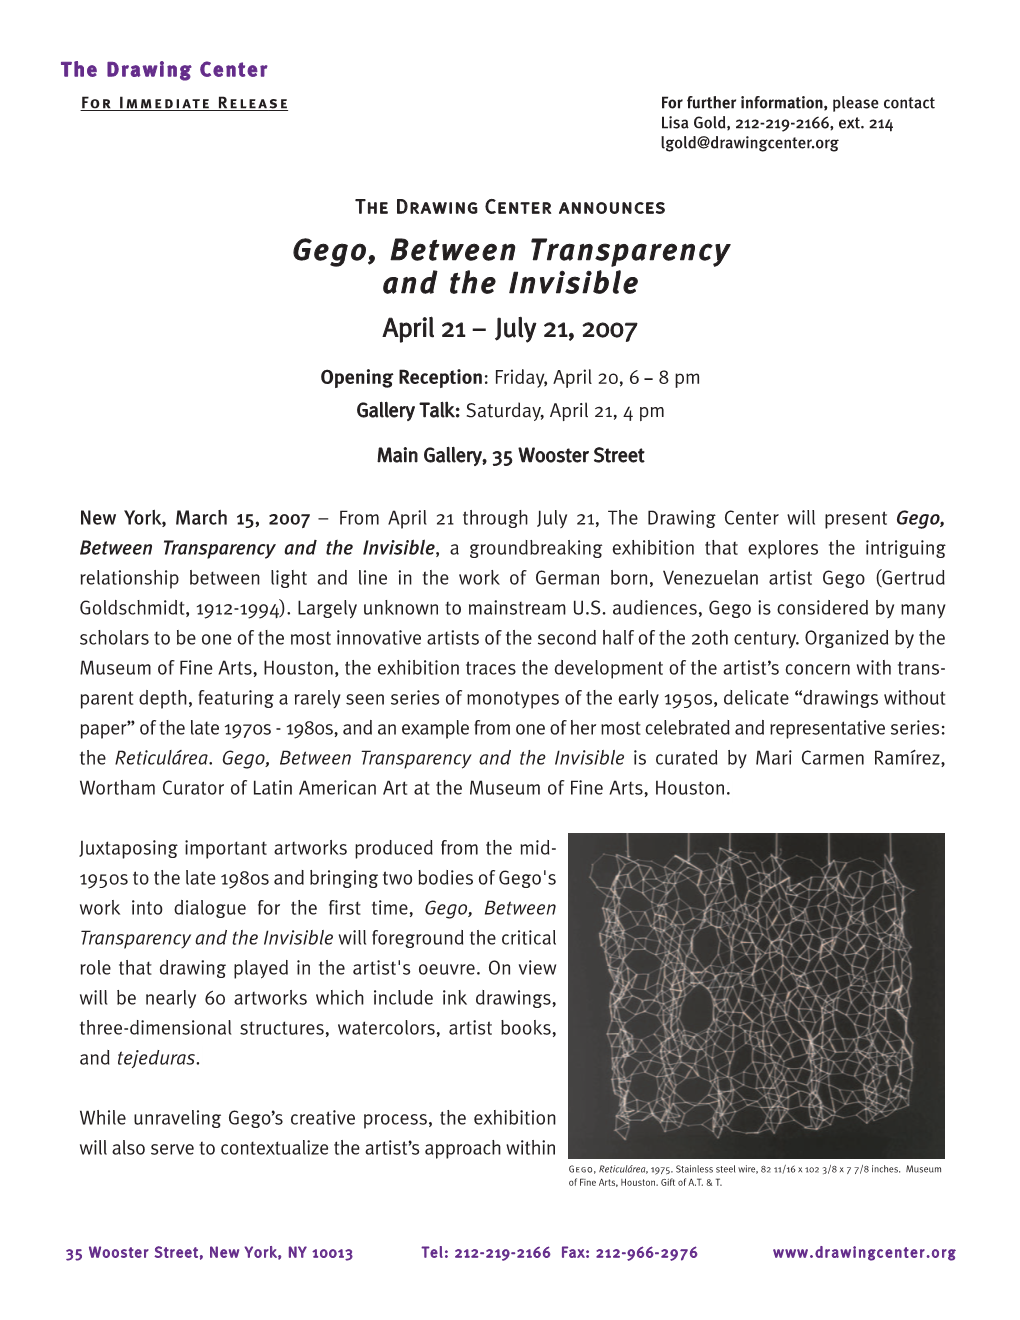 Gego, Between Transparency and the Invisible April 21 – July 21, 2007